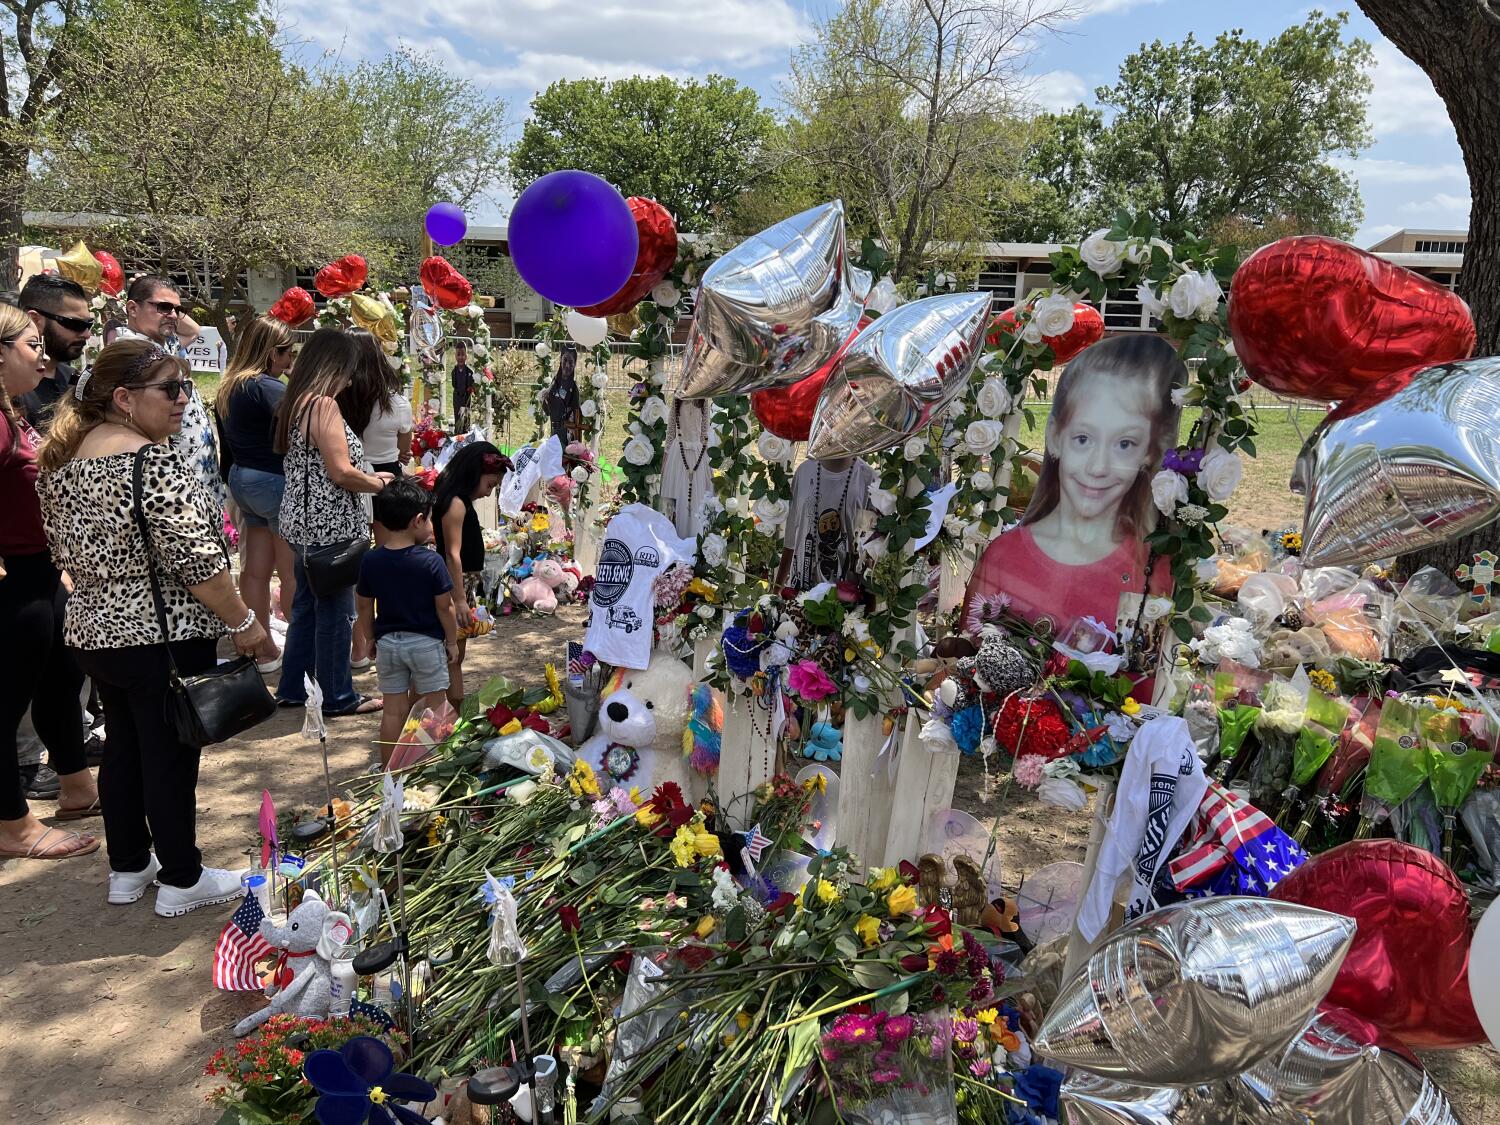 Abcarian: The pathetic lessons of the Uvalde school shooting in Texas